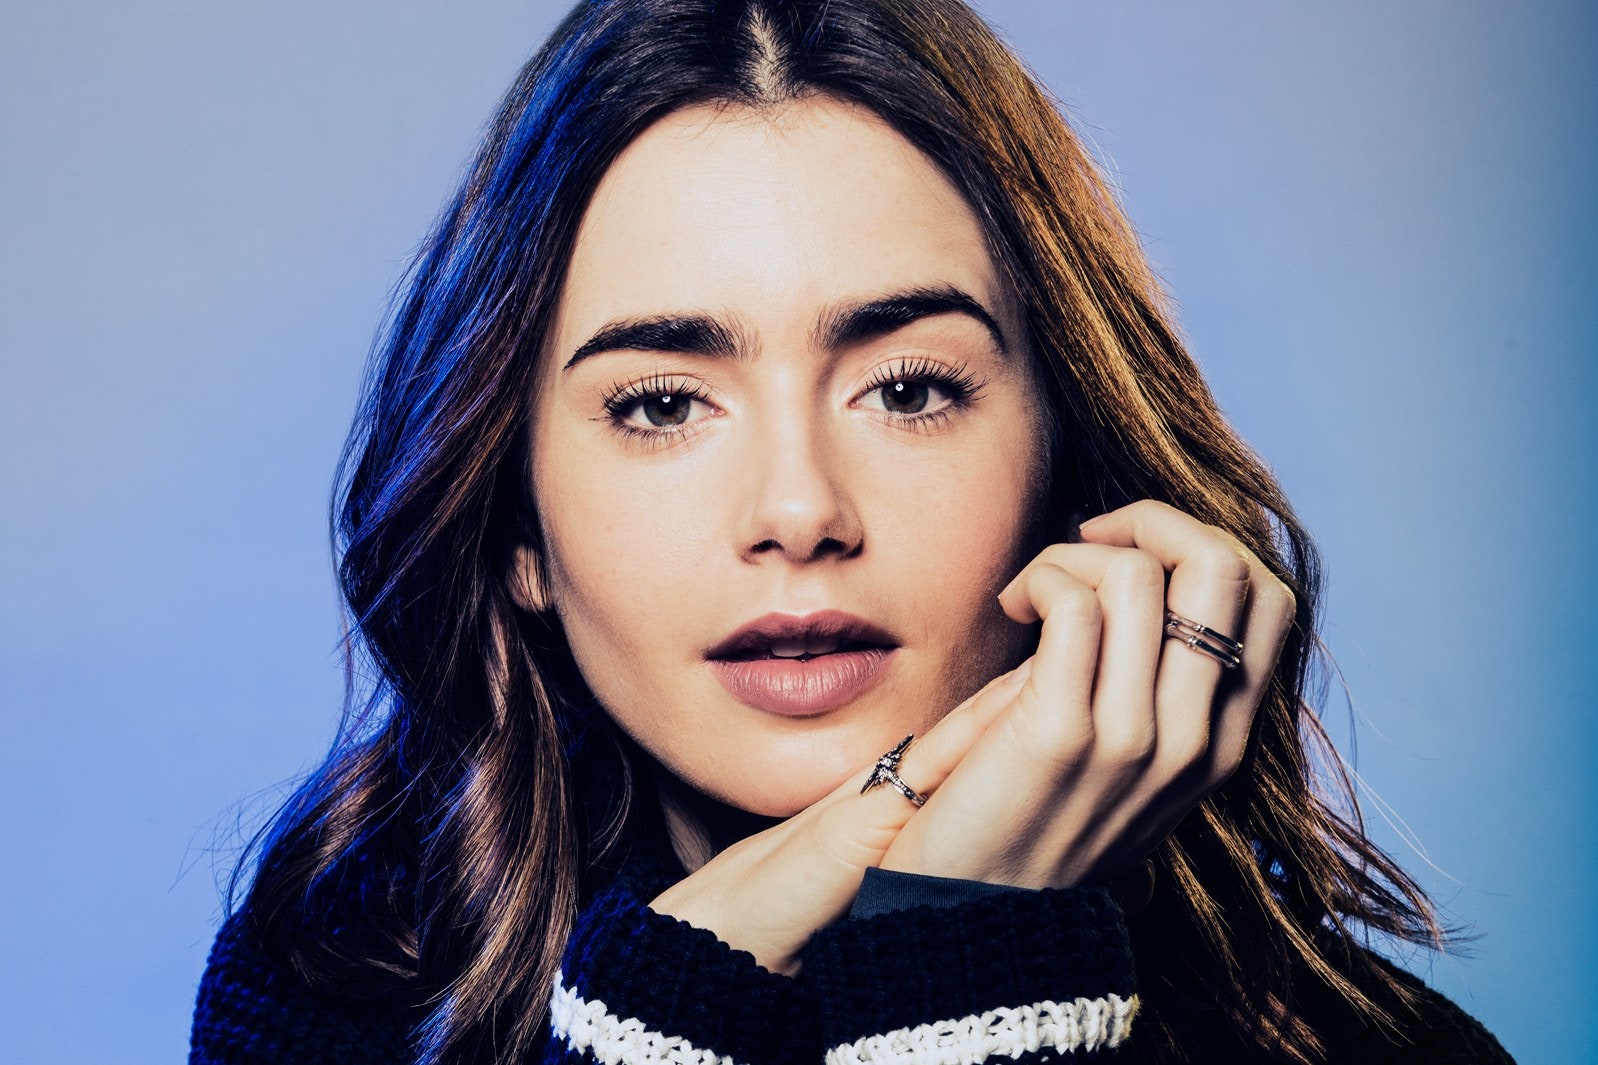 Lily Collins 2019 Wallpapers